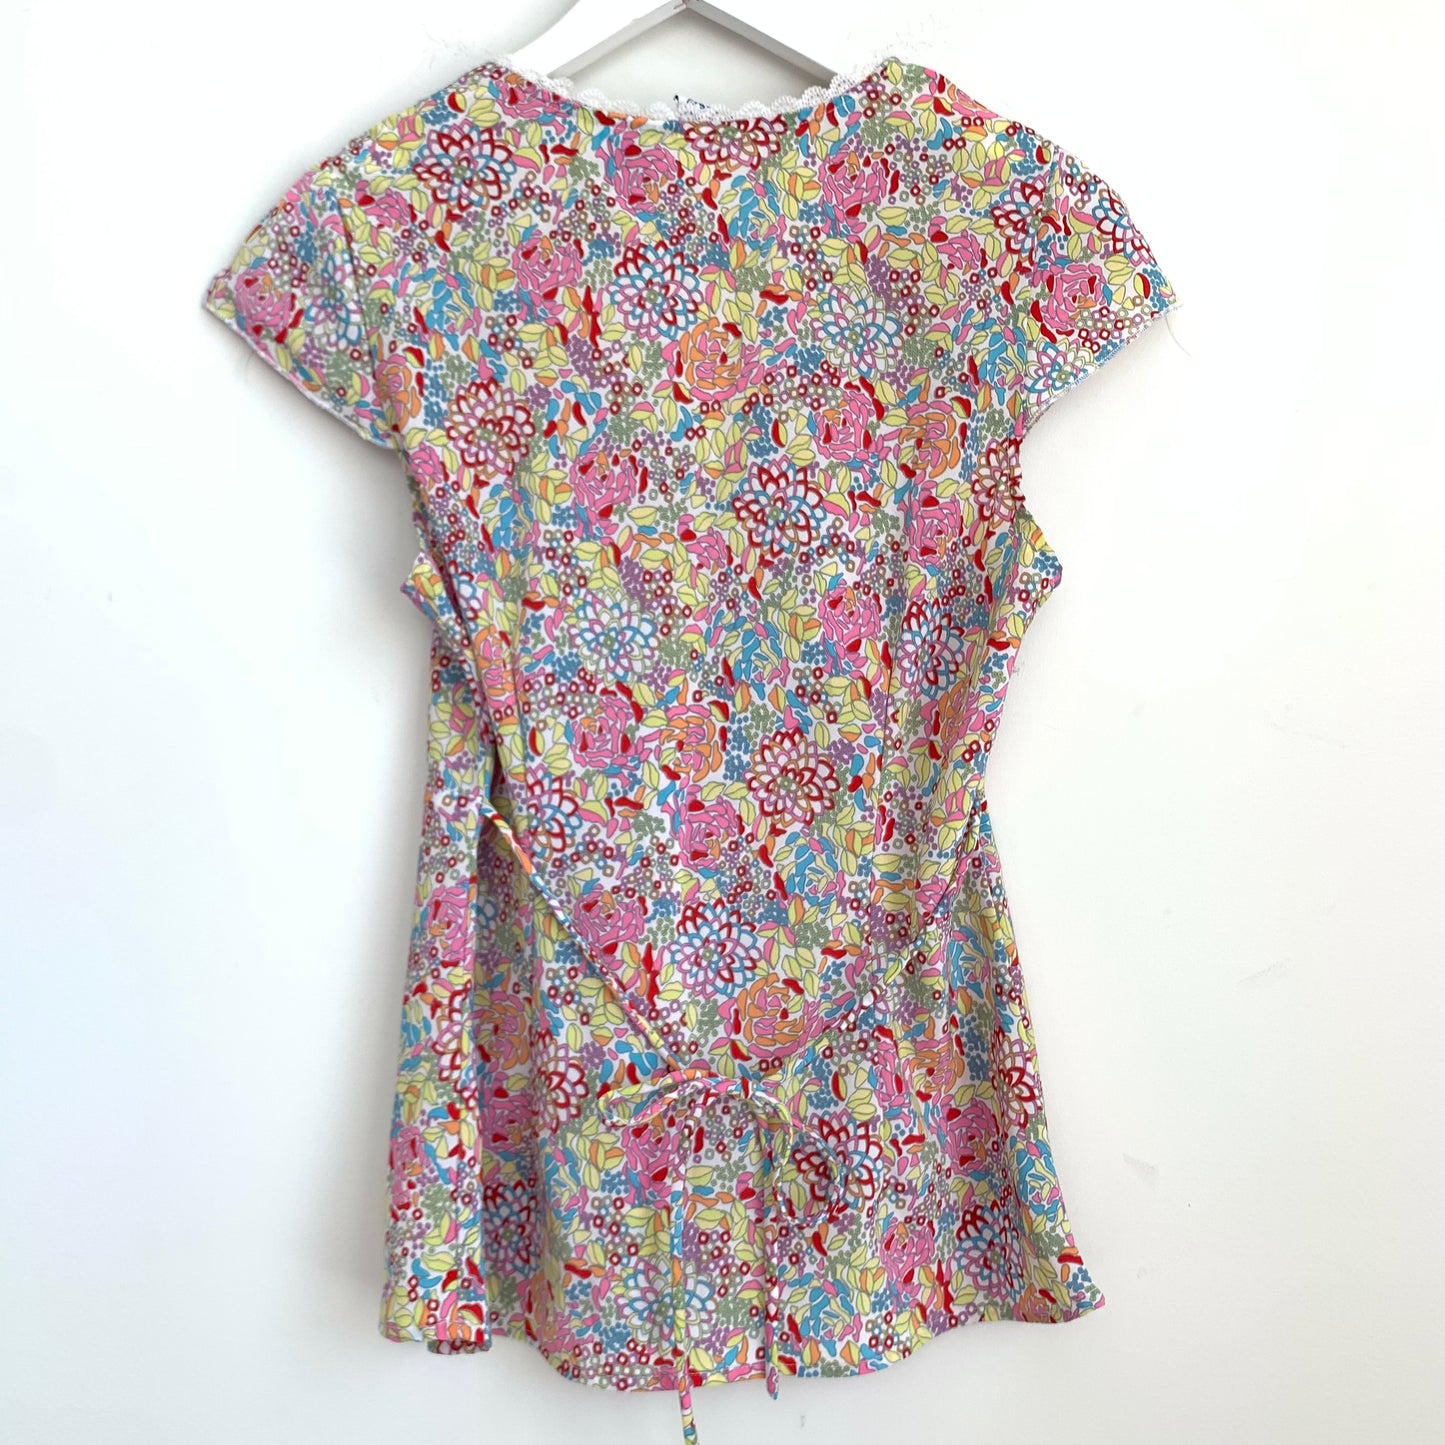 Carolina Blues Y2K Style Blouse Colorful Floral Print Psychedelic Cap Sleeve